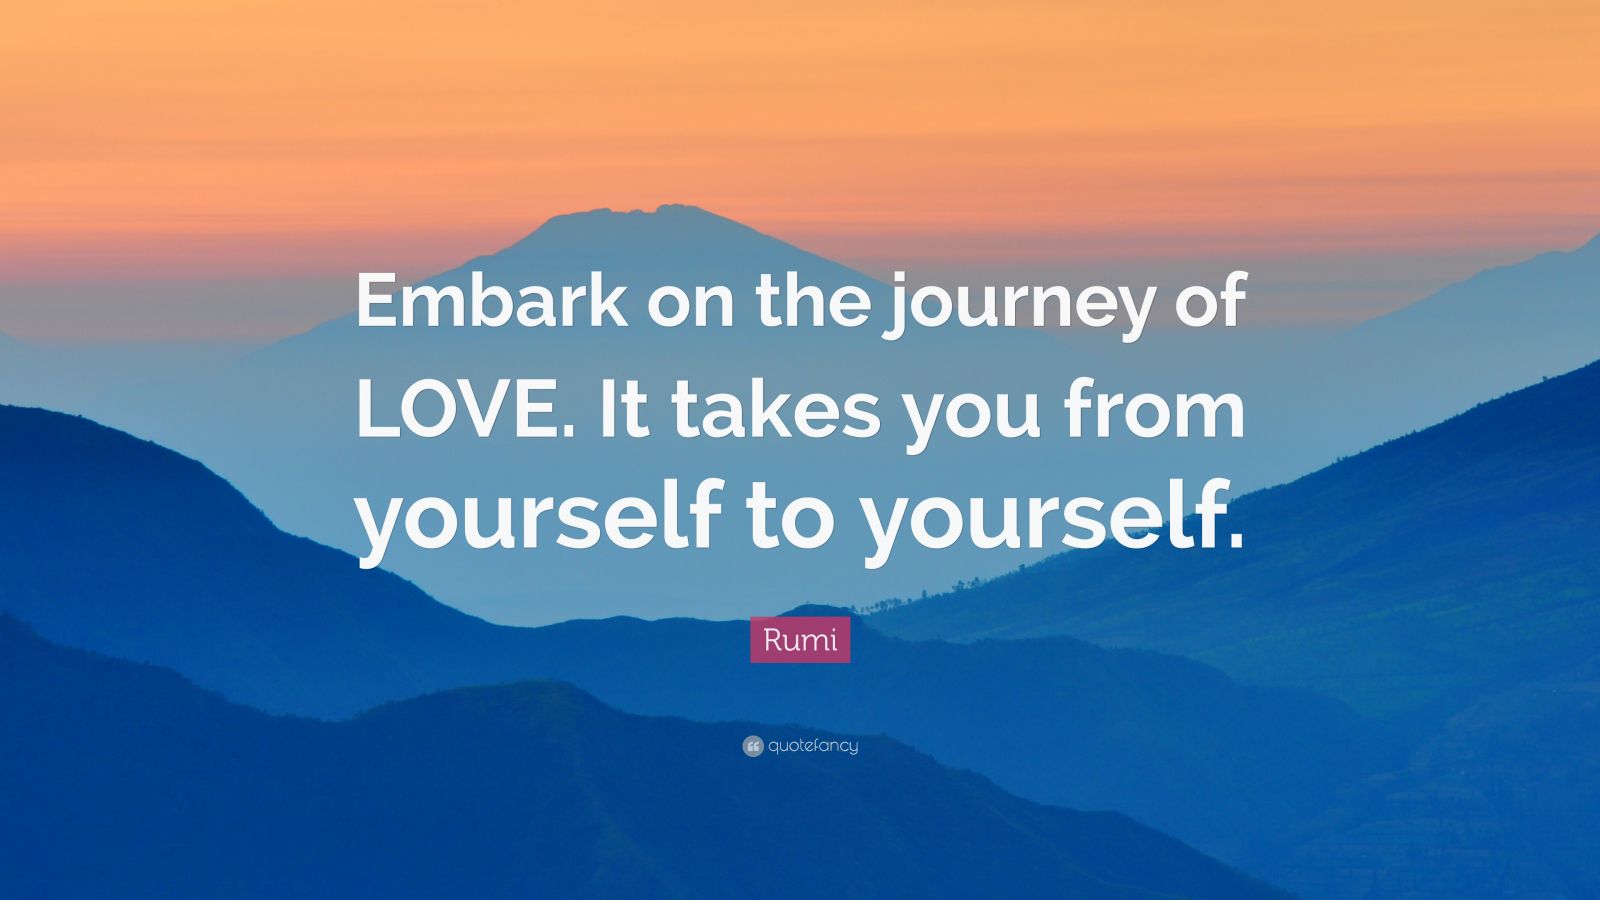 Rumi Quote: “Embark on the journey of LOVE. It takes you from yourself ...